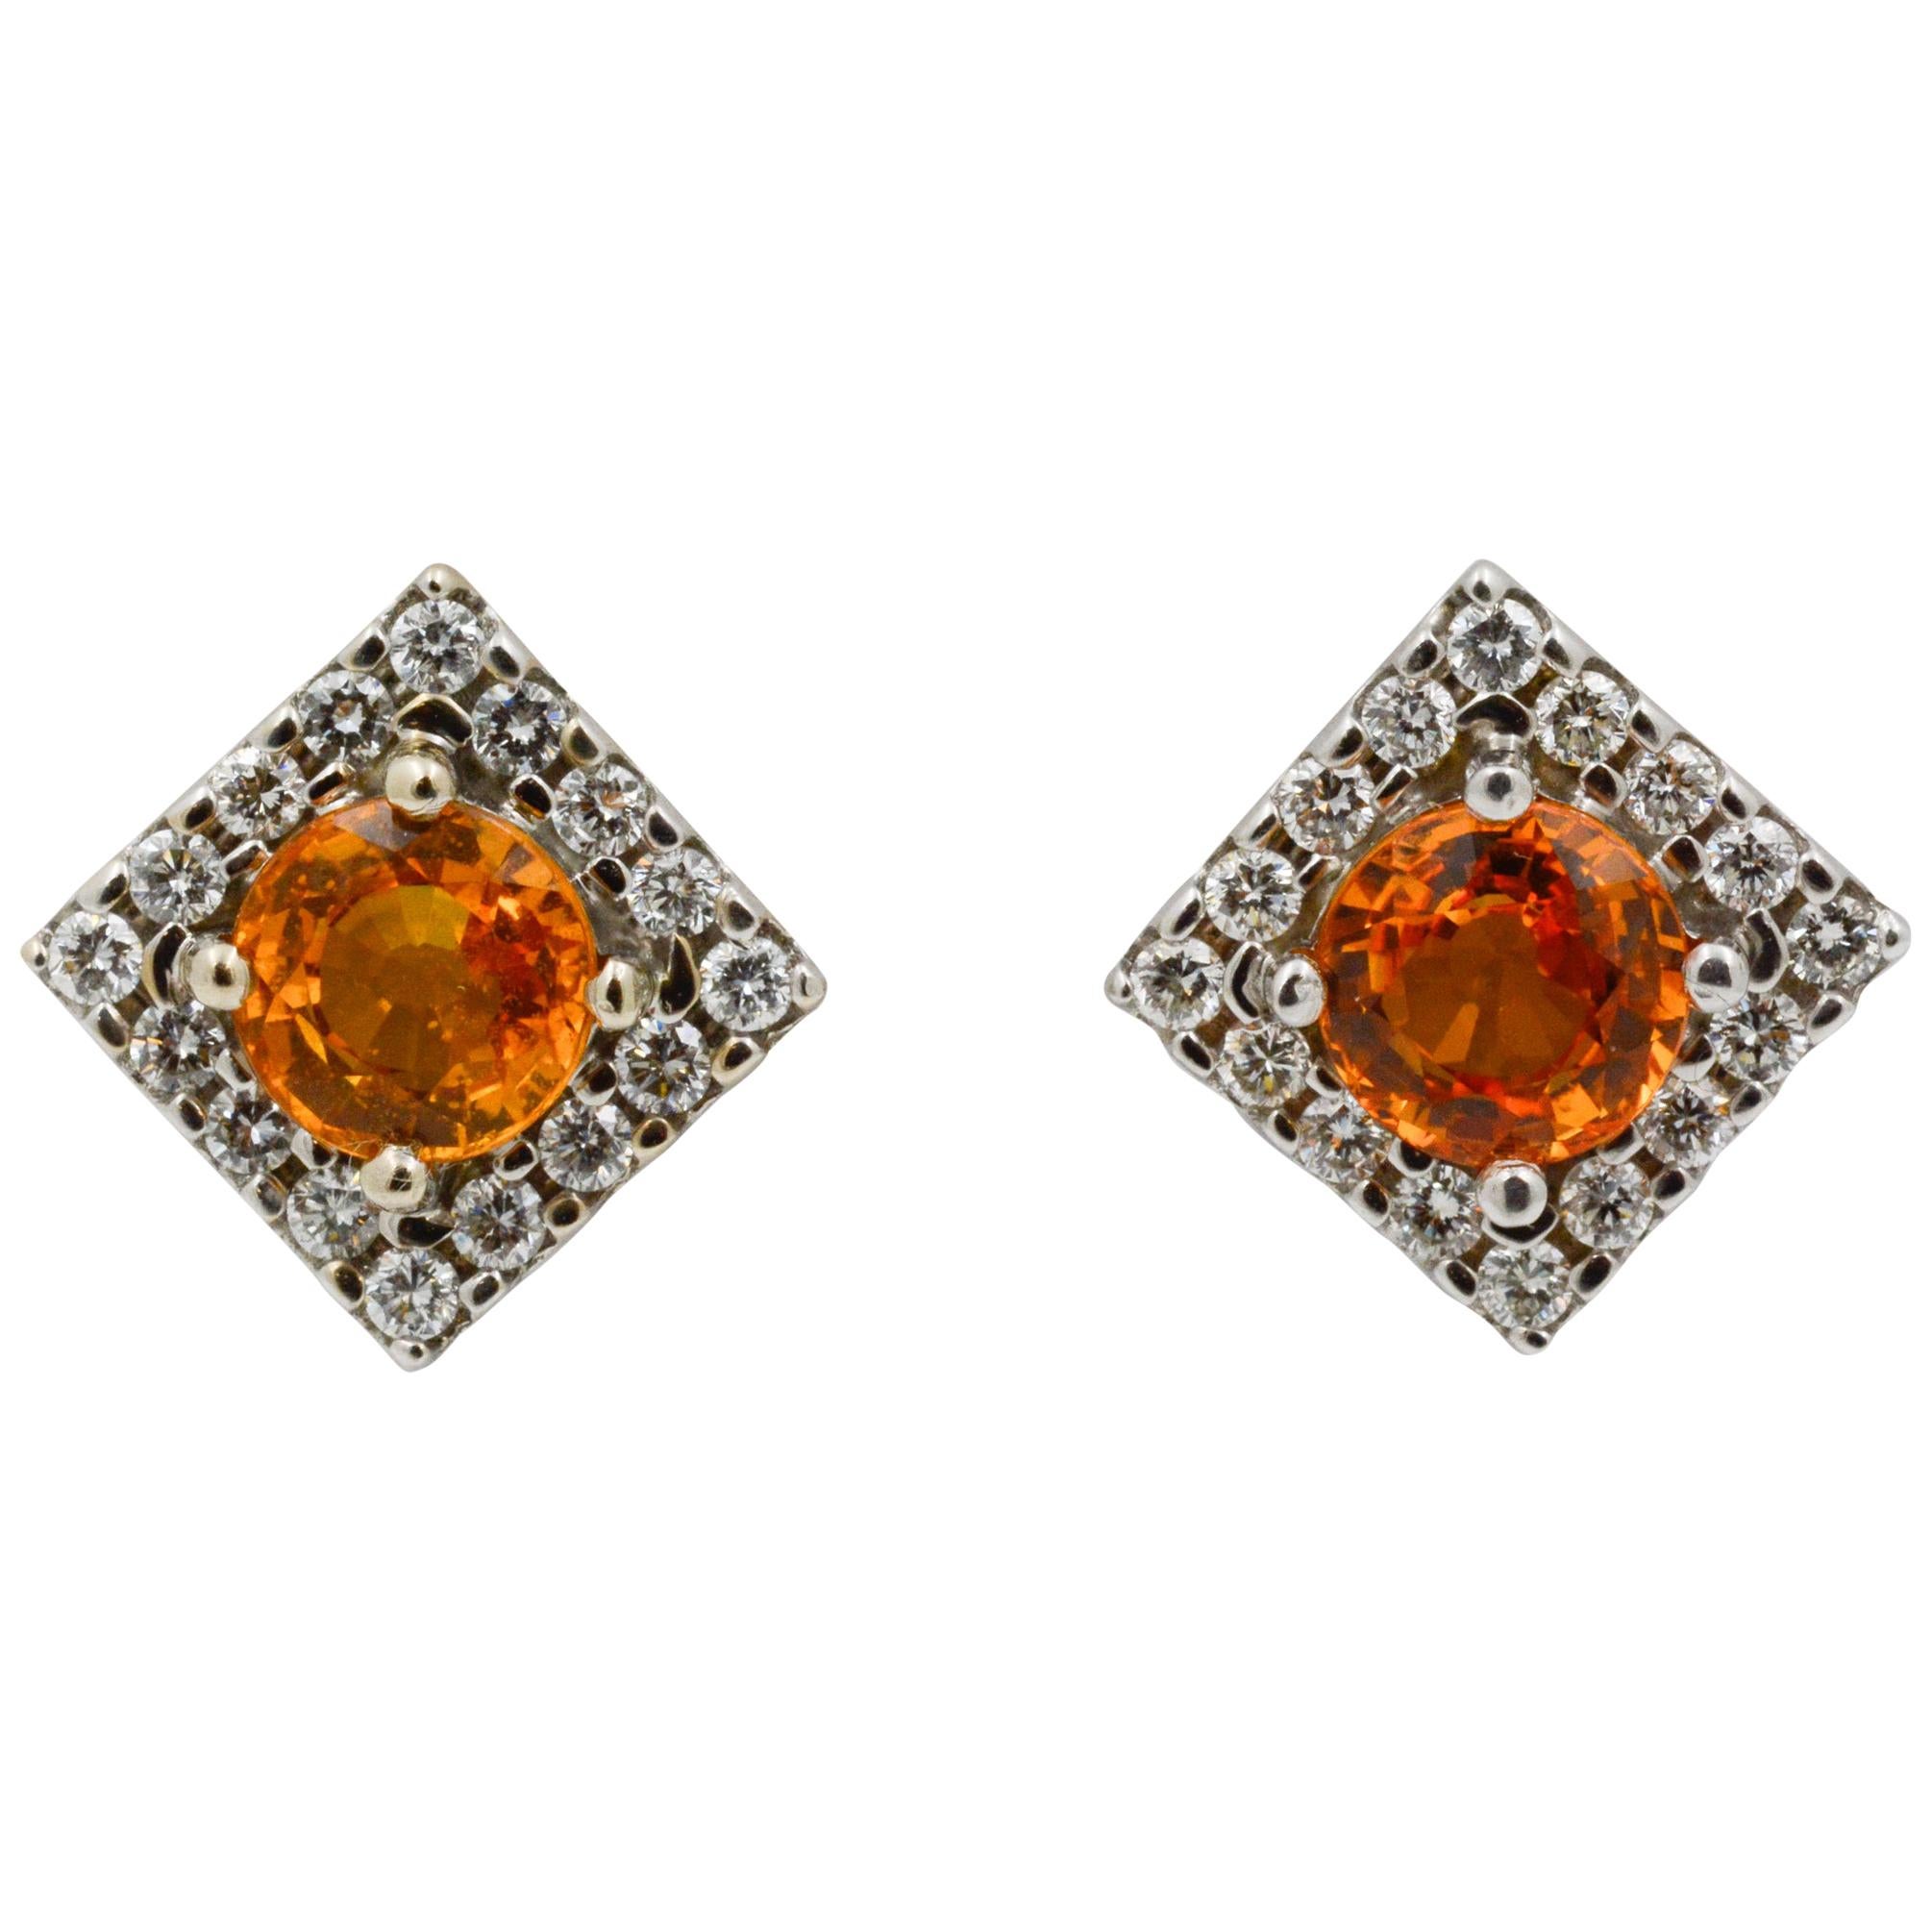 Circa 1990's 18 karat white gold square stud earrings staring 3.20 carats round cut Gold Sapphires that are accented with 32 round brilliant cut diamonds (0.64 carats total weight, G-H color, VS internal clarity) with 18 KW gold post backs.